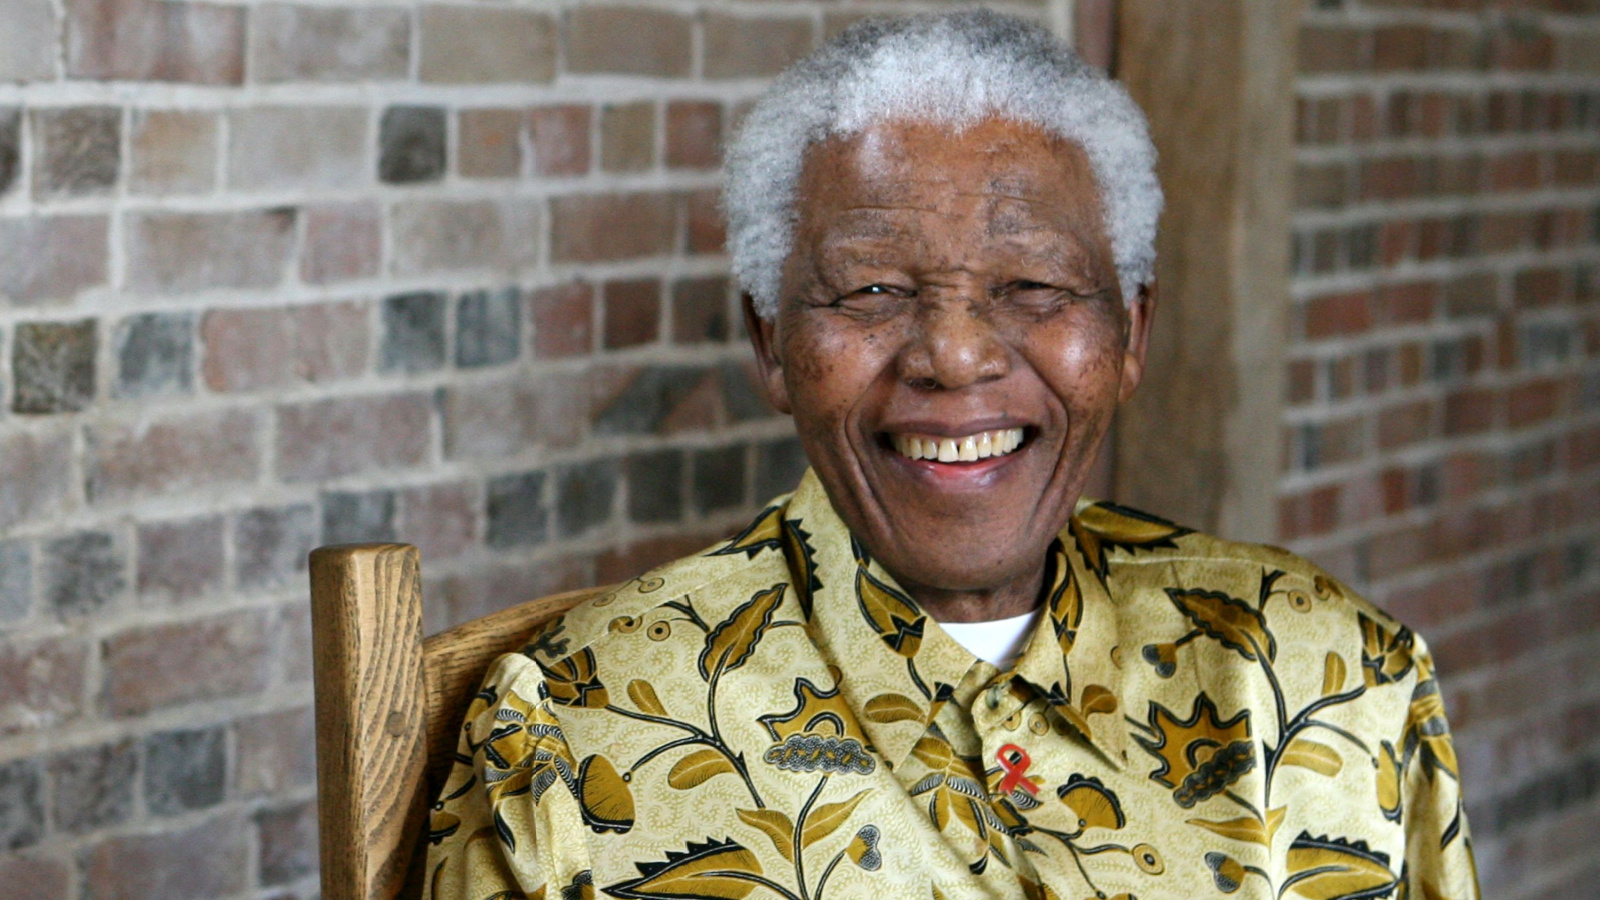 image credit: Alessia-Pierdomenico/Shutterstock <p><span>Nelson Mandela’s long walk to freedom is a story of resilience and reconciliation. After 27 years in prison, he emerged not with bitterness but with a vision of peace and unity for South Africa. His presidency and work to dismantle apartheid set a global standard for leadership and humanity. Mandela’s legacy is a testament to the power of forgiveness and collective healing.</span></p>